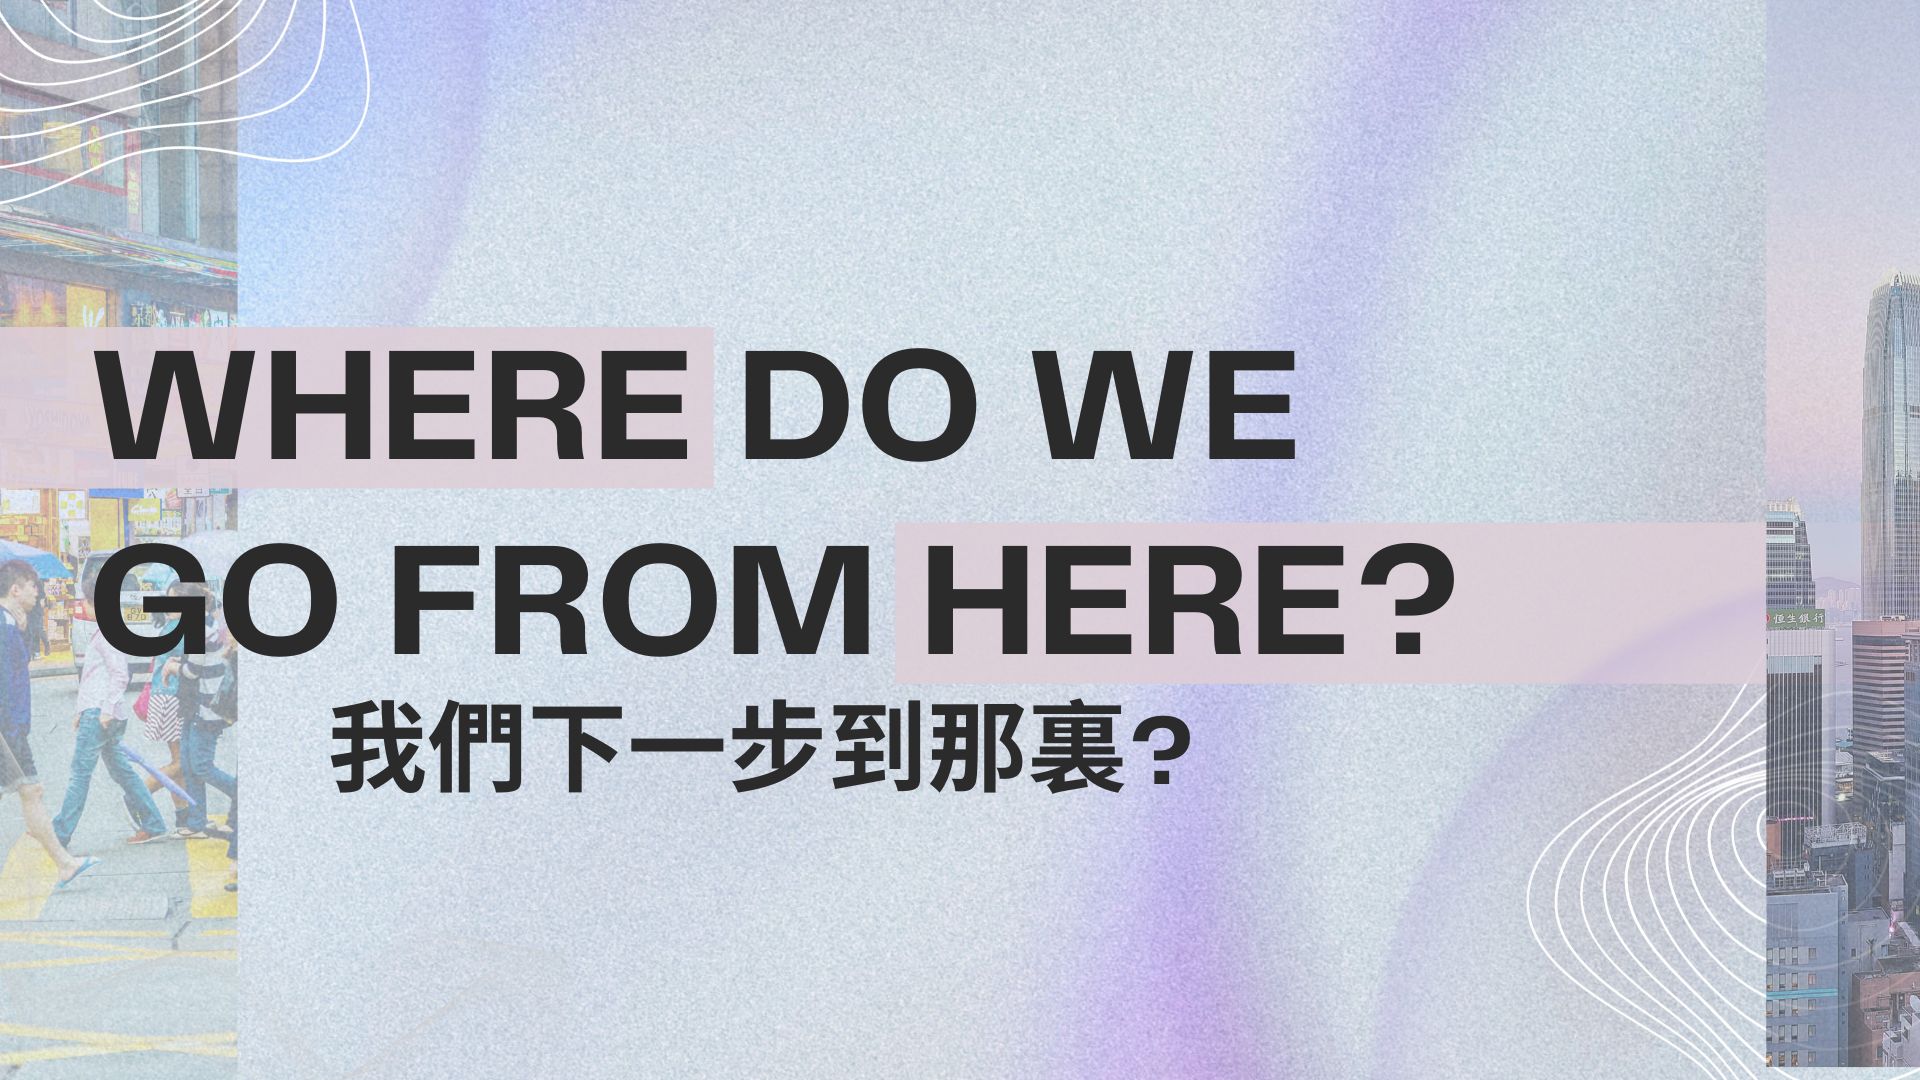 Sermon Title - Where do we go from here - web